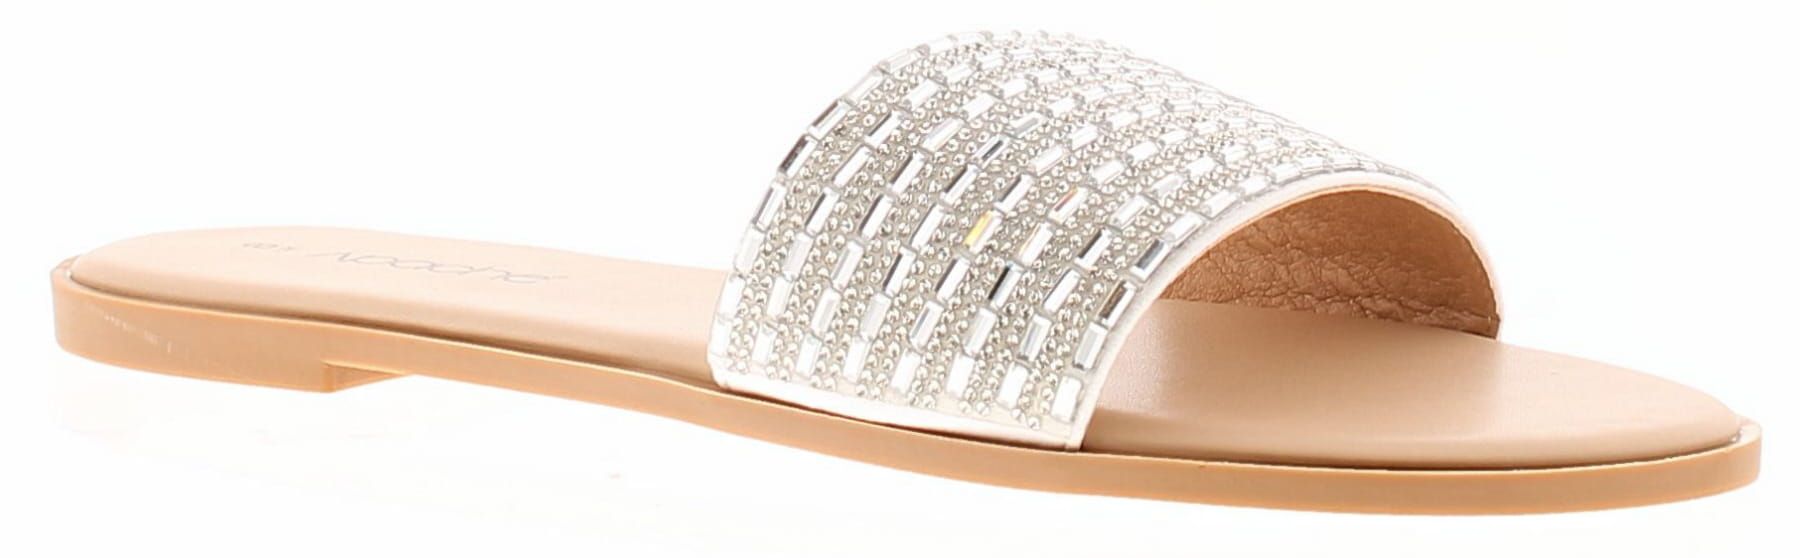 Apache Sparkle Womens Flat Sandals Silver. Manmade Upper. Manmade Lining. Synthetic Sole. Ladies Womans Holiday Summer Slip On Slider Open Toe Casual.